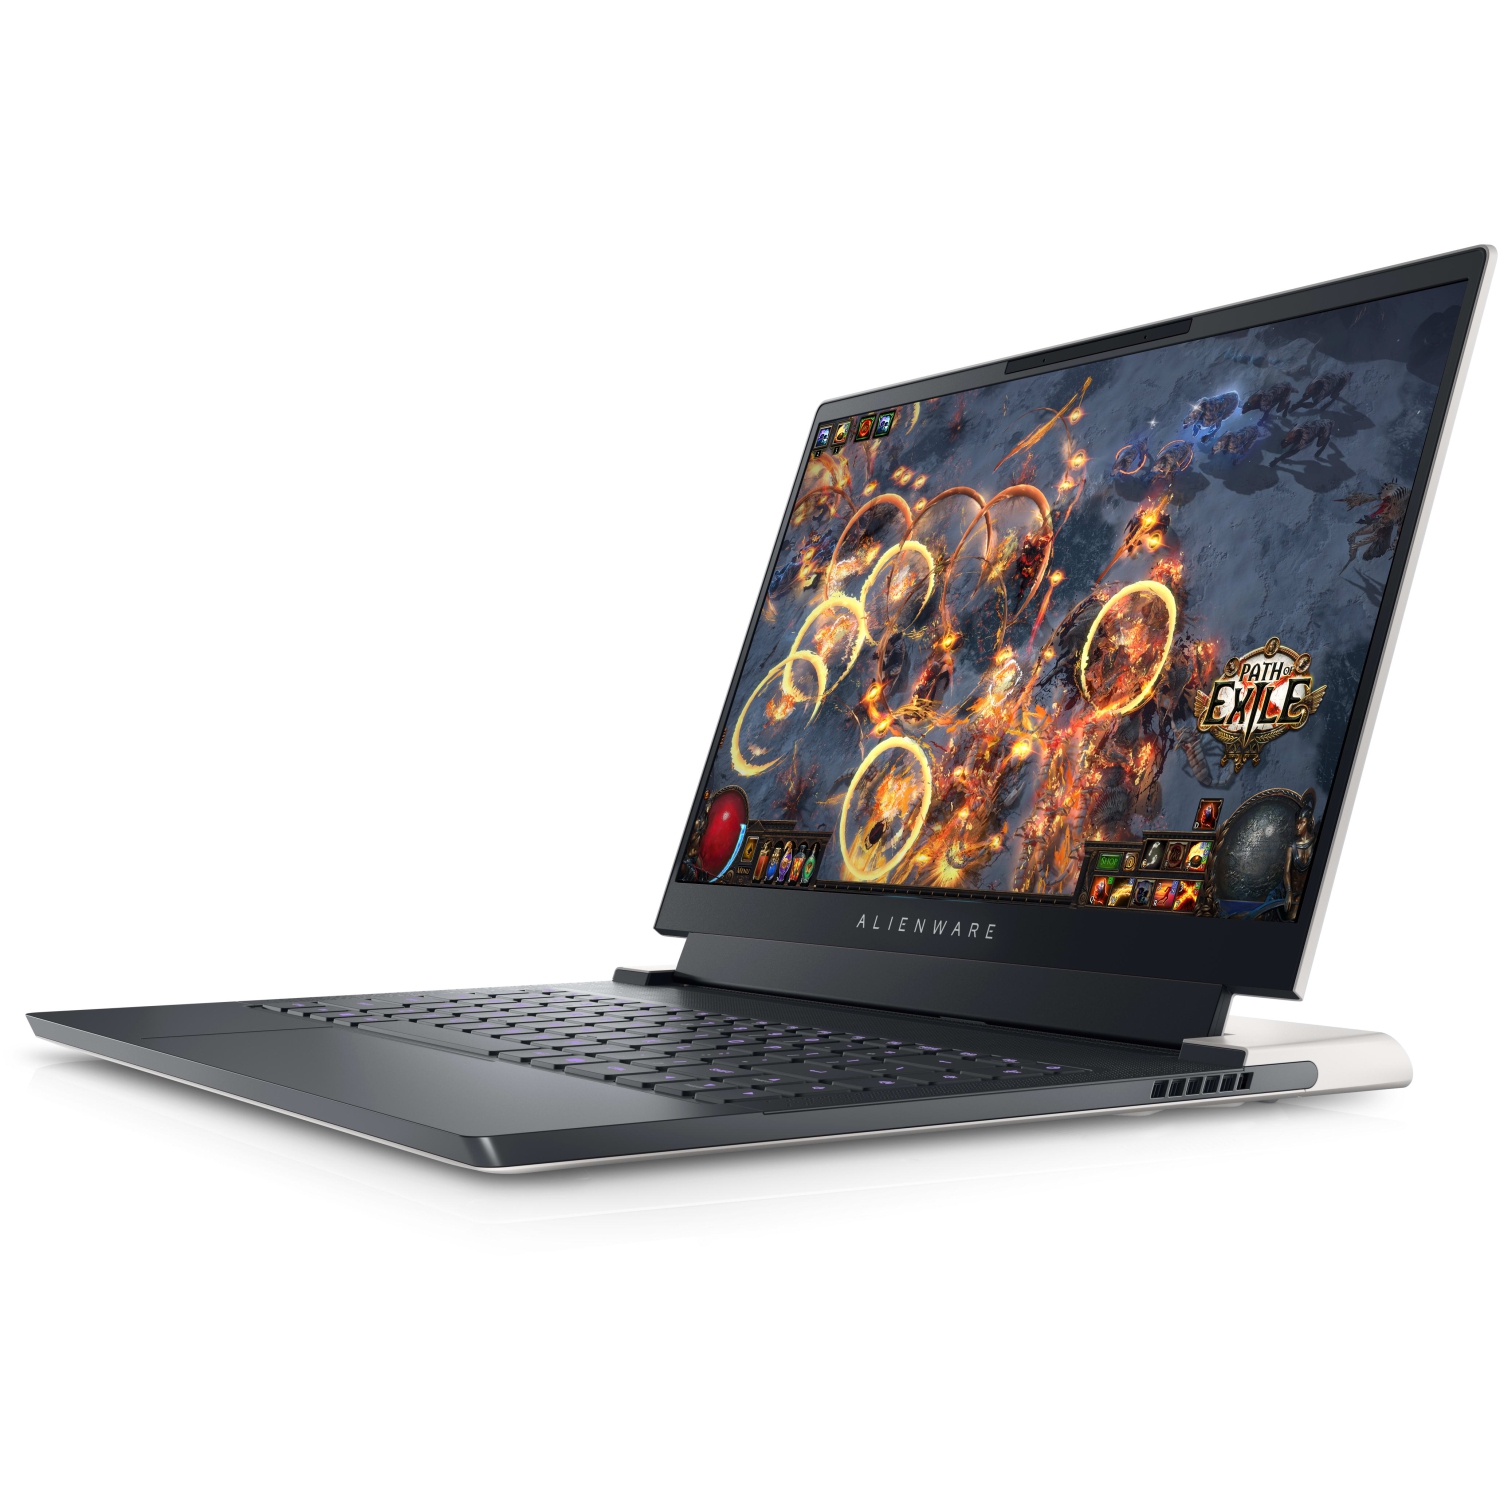 Refurbished (Excellent) – Dell Alienware X14 Gaming Laptop (2022) | 14" FHD | Core i7 - 512GB SSD - 32GB RAM - RTX 3060 | 14 Cores @ 4.7 GHz - 12th Gen CPU - 6GB GDDR6